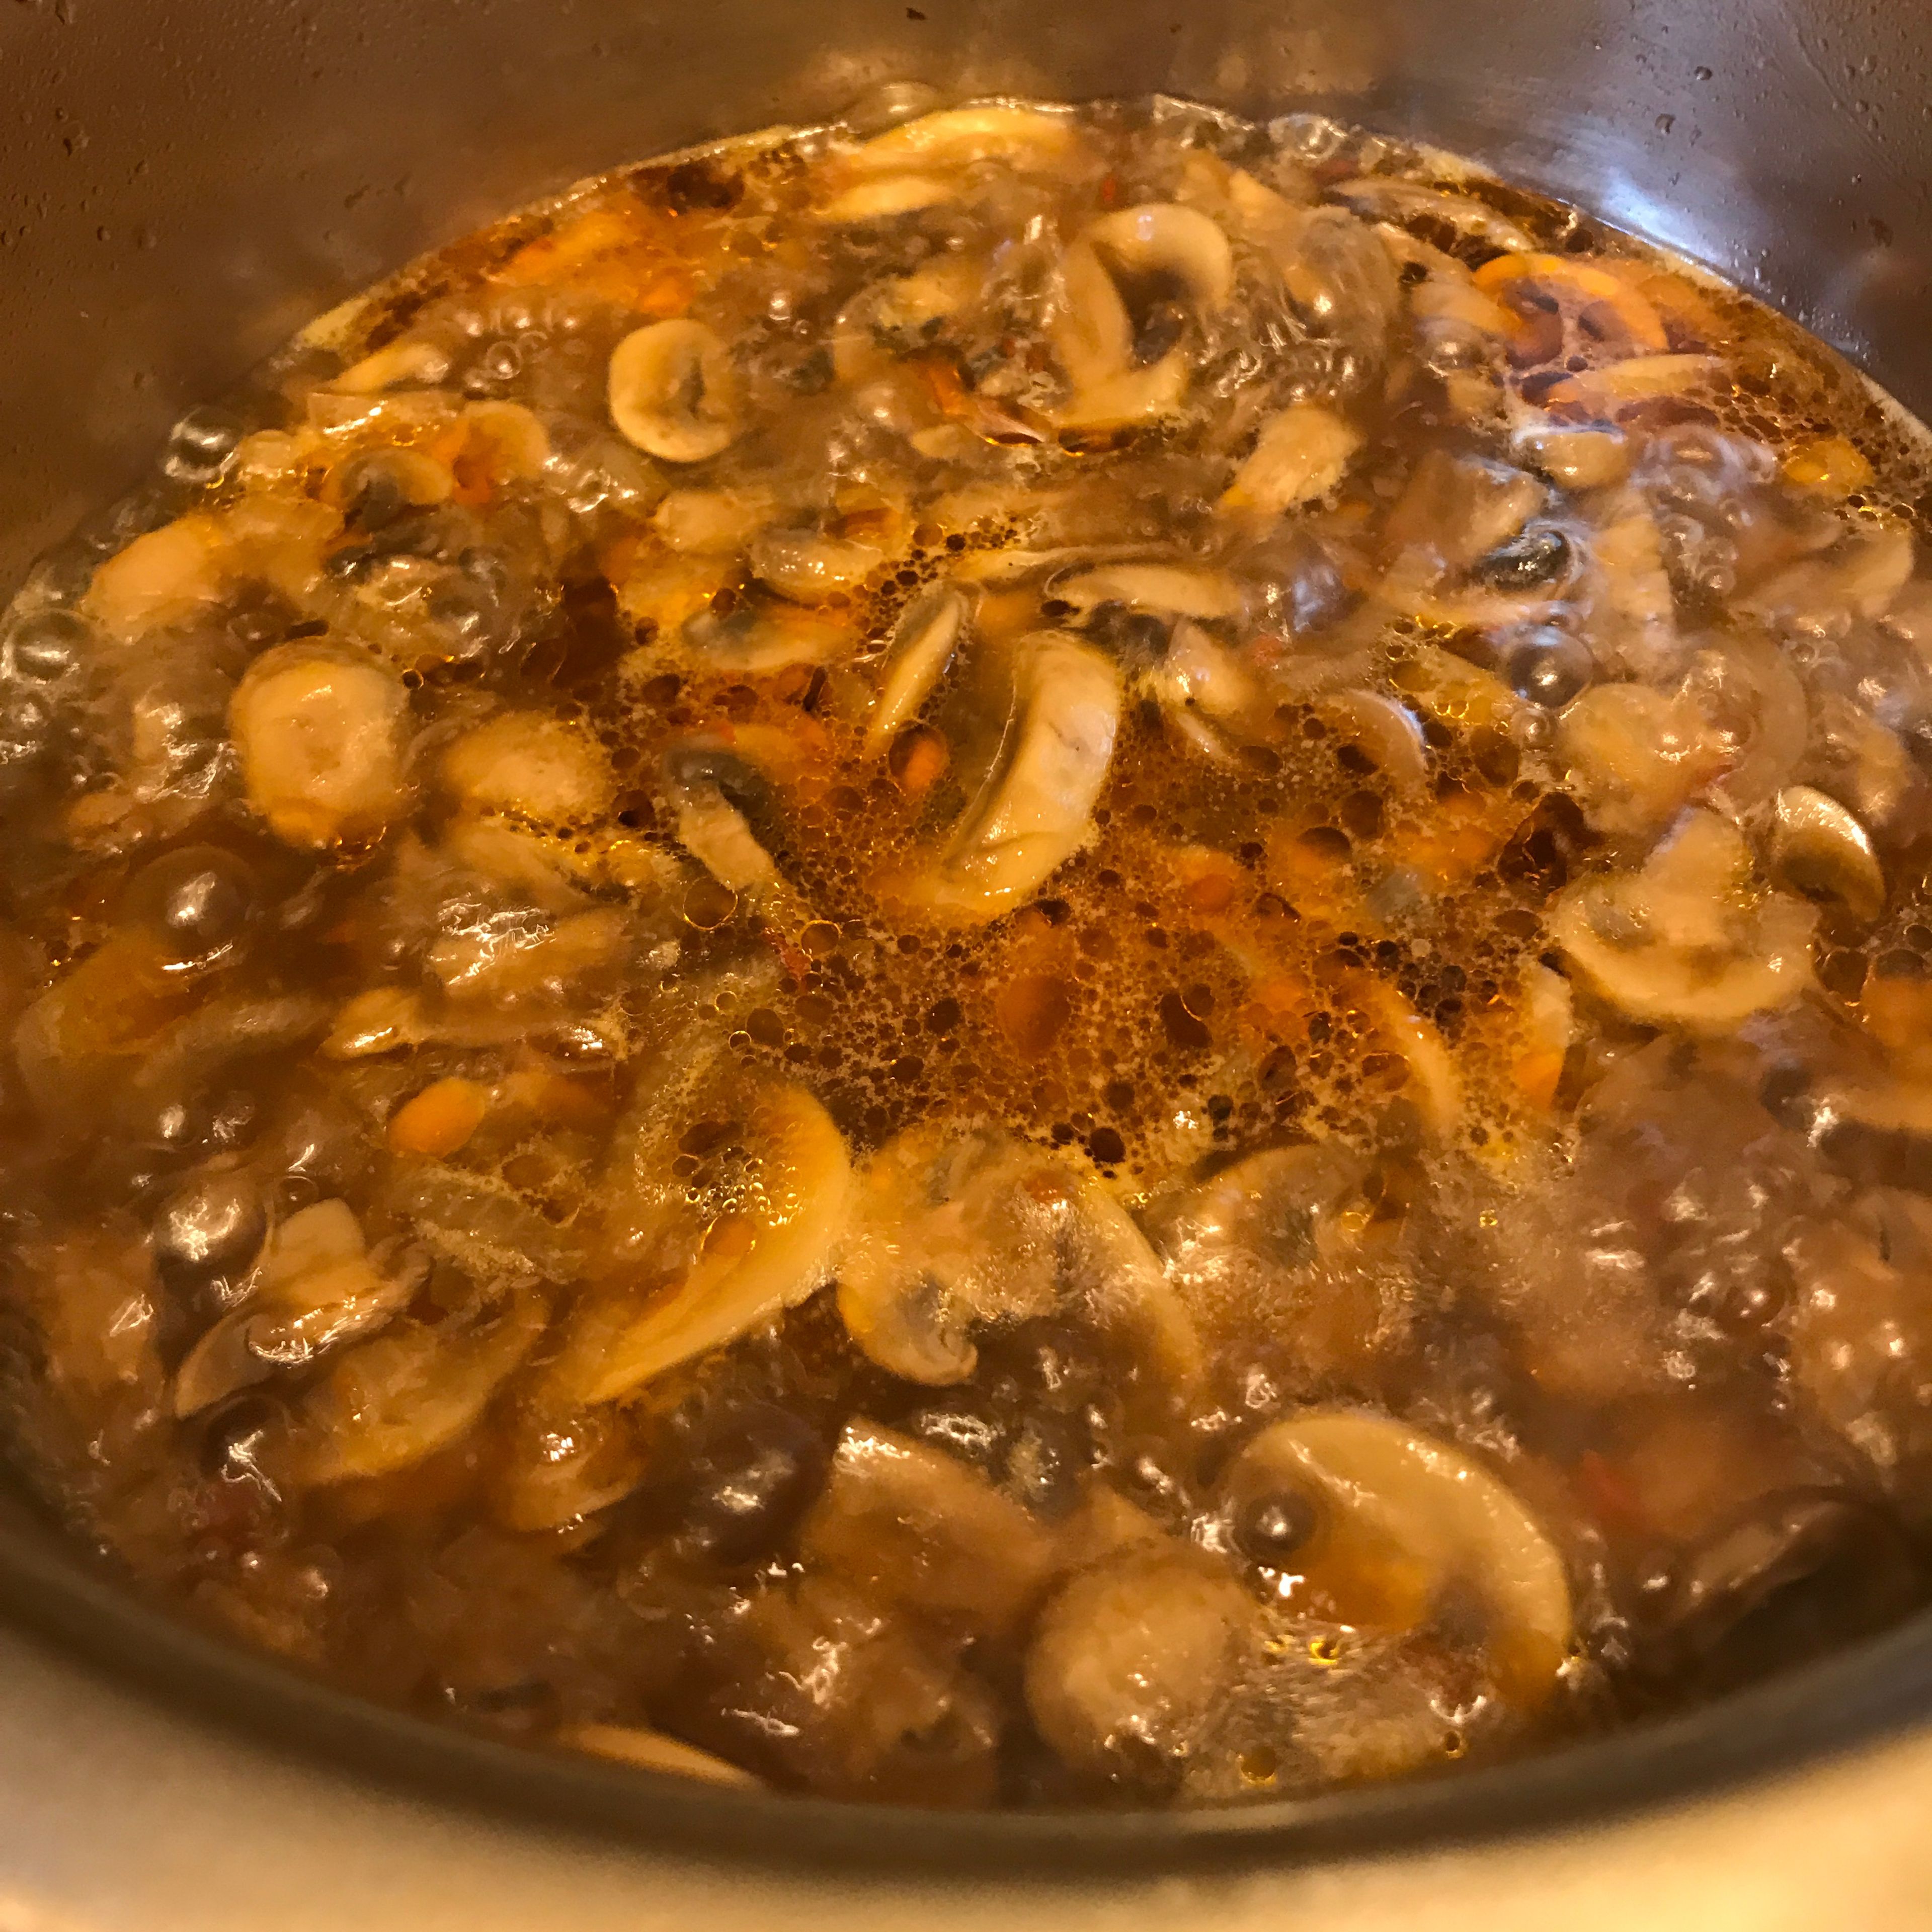 After half an hour the mushrooms will be covered with water because they contain also water. Now we wait for another 30 minutes for the water to evaporate throw boiling. 